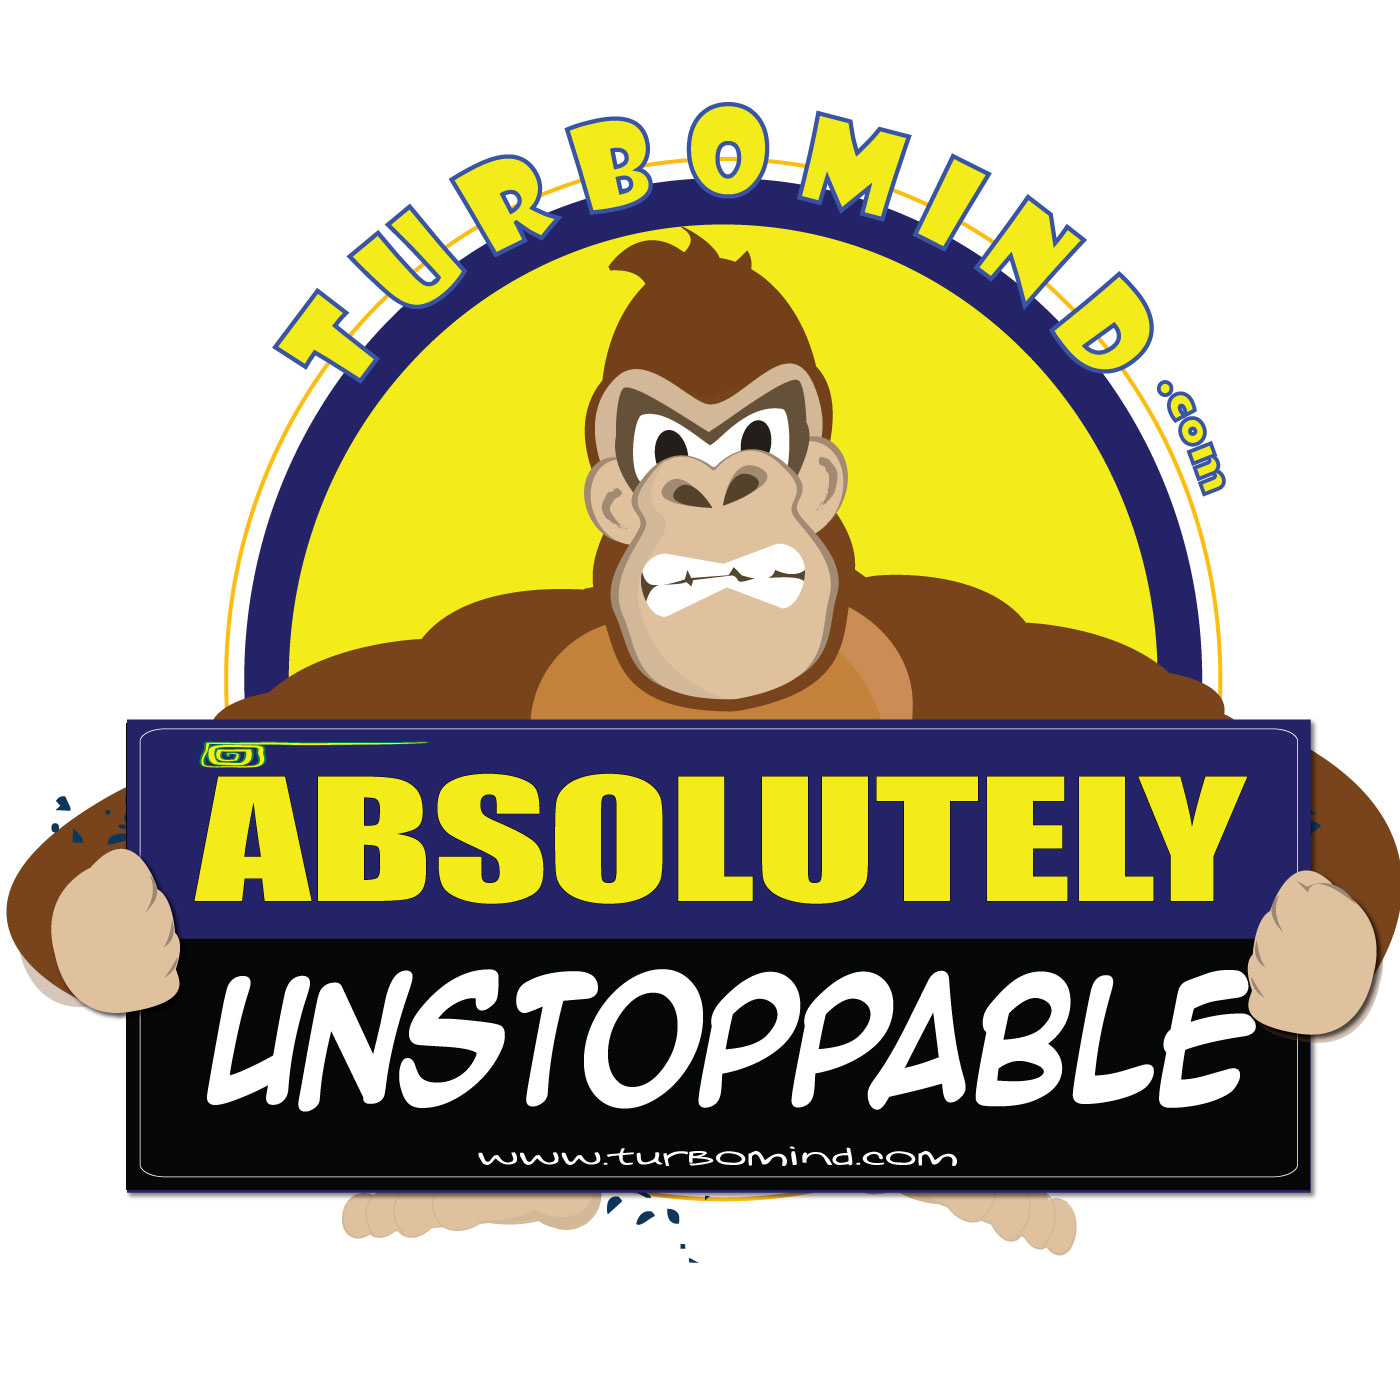 ABSOLUTELY UNSTOPPABLE NFT, TURBOMIND.COM